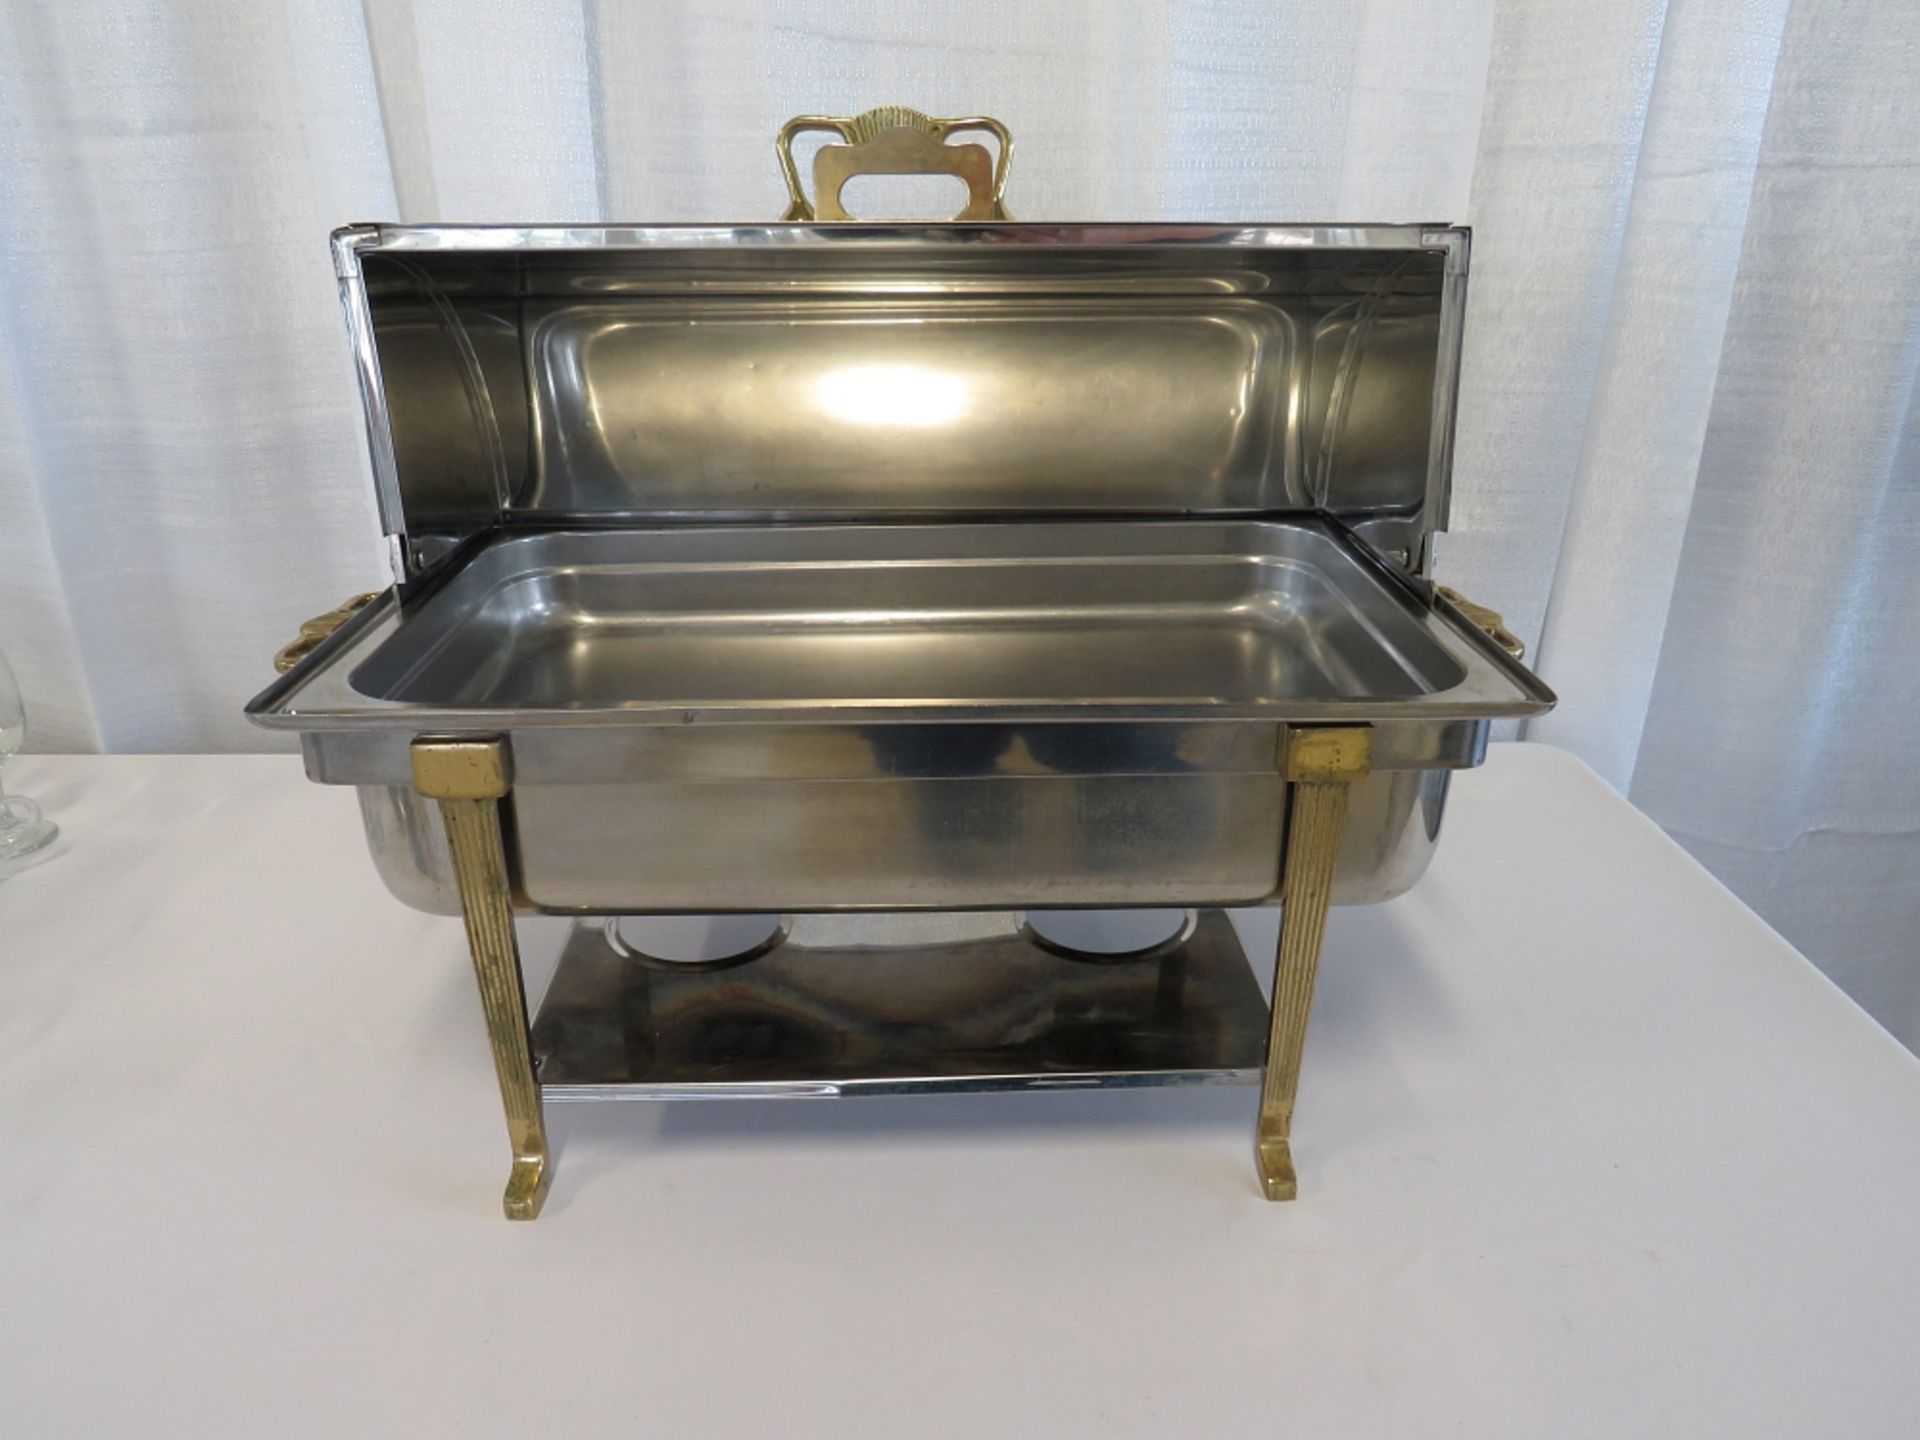 Vollrath 8 Qt. Rolltop Chafer - Image 2 of 2